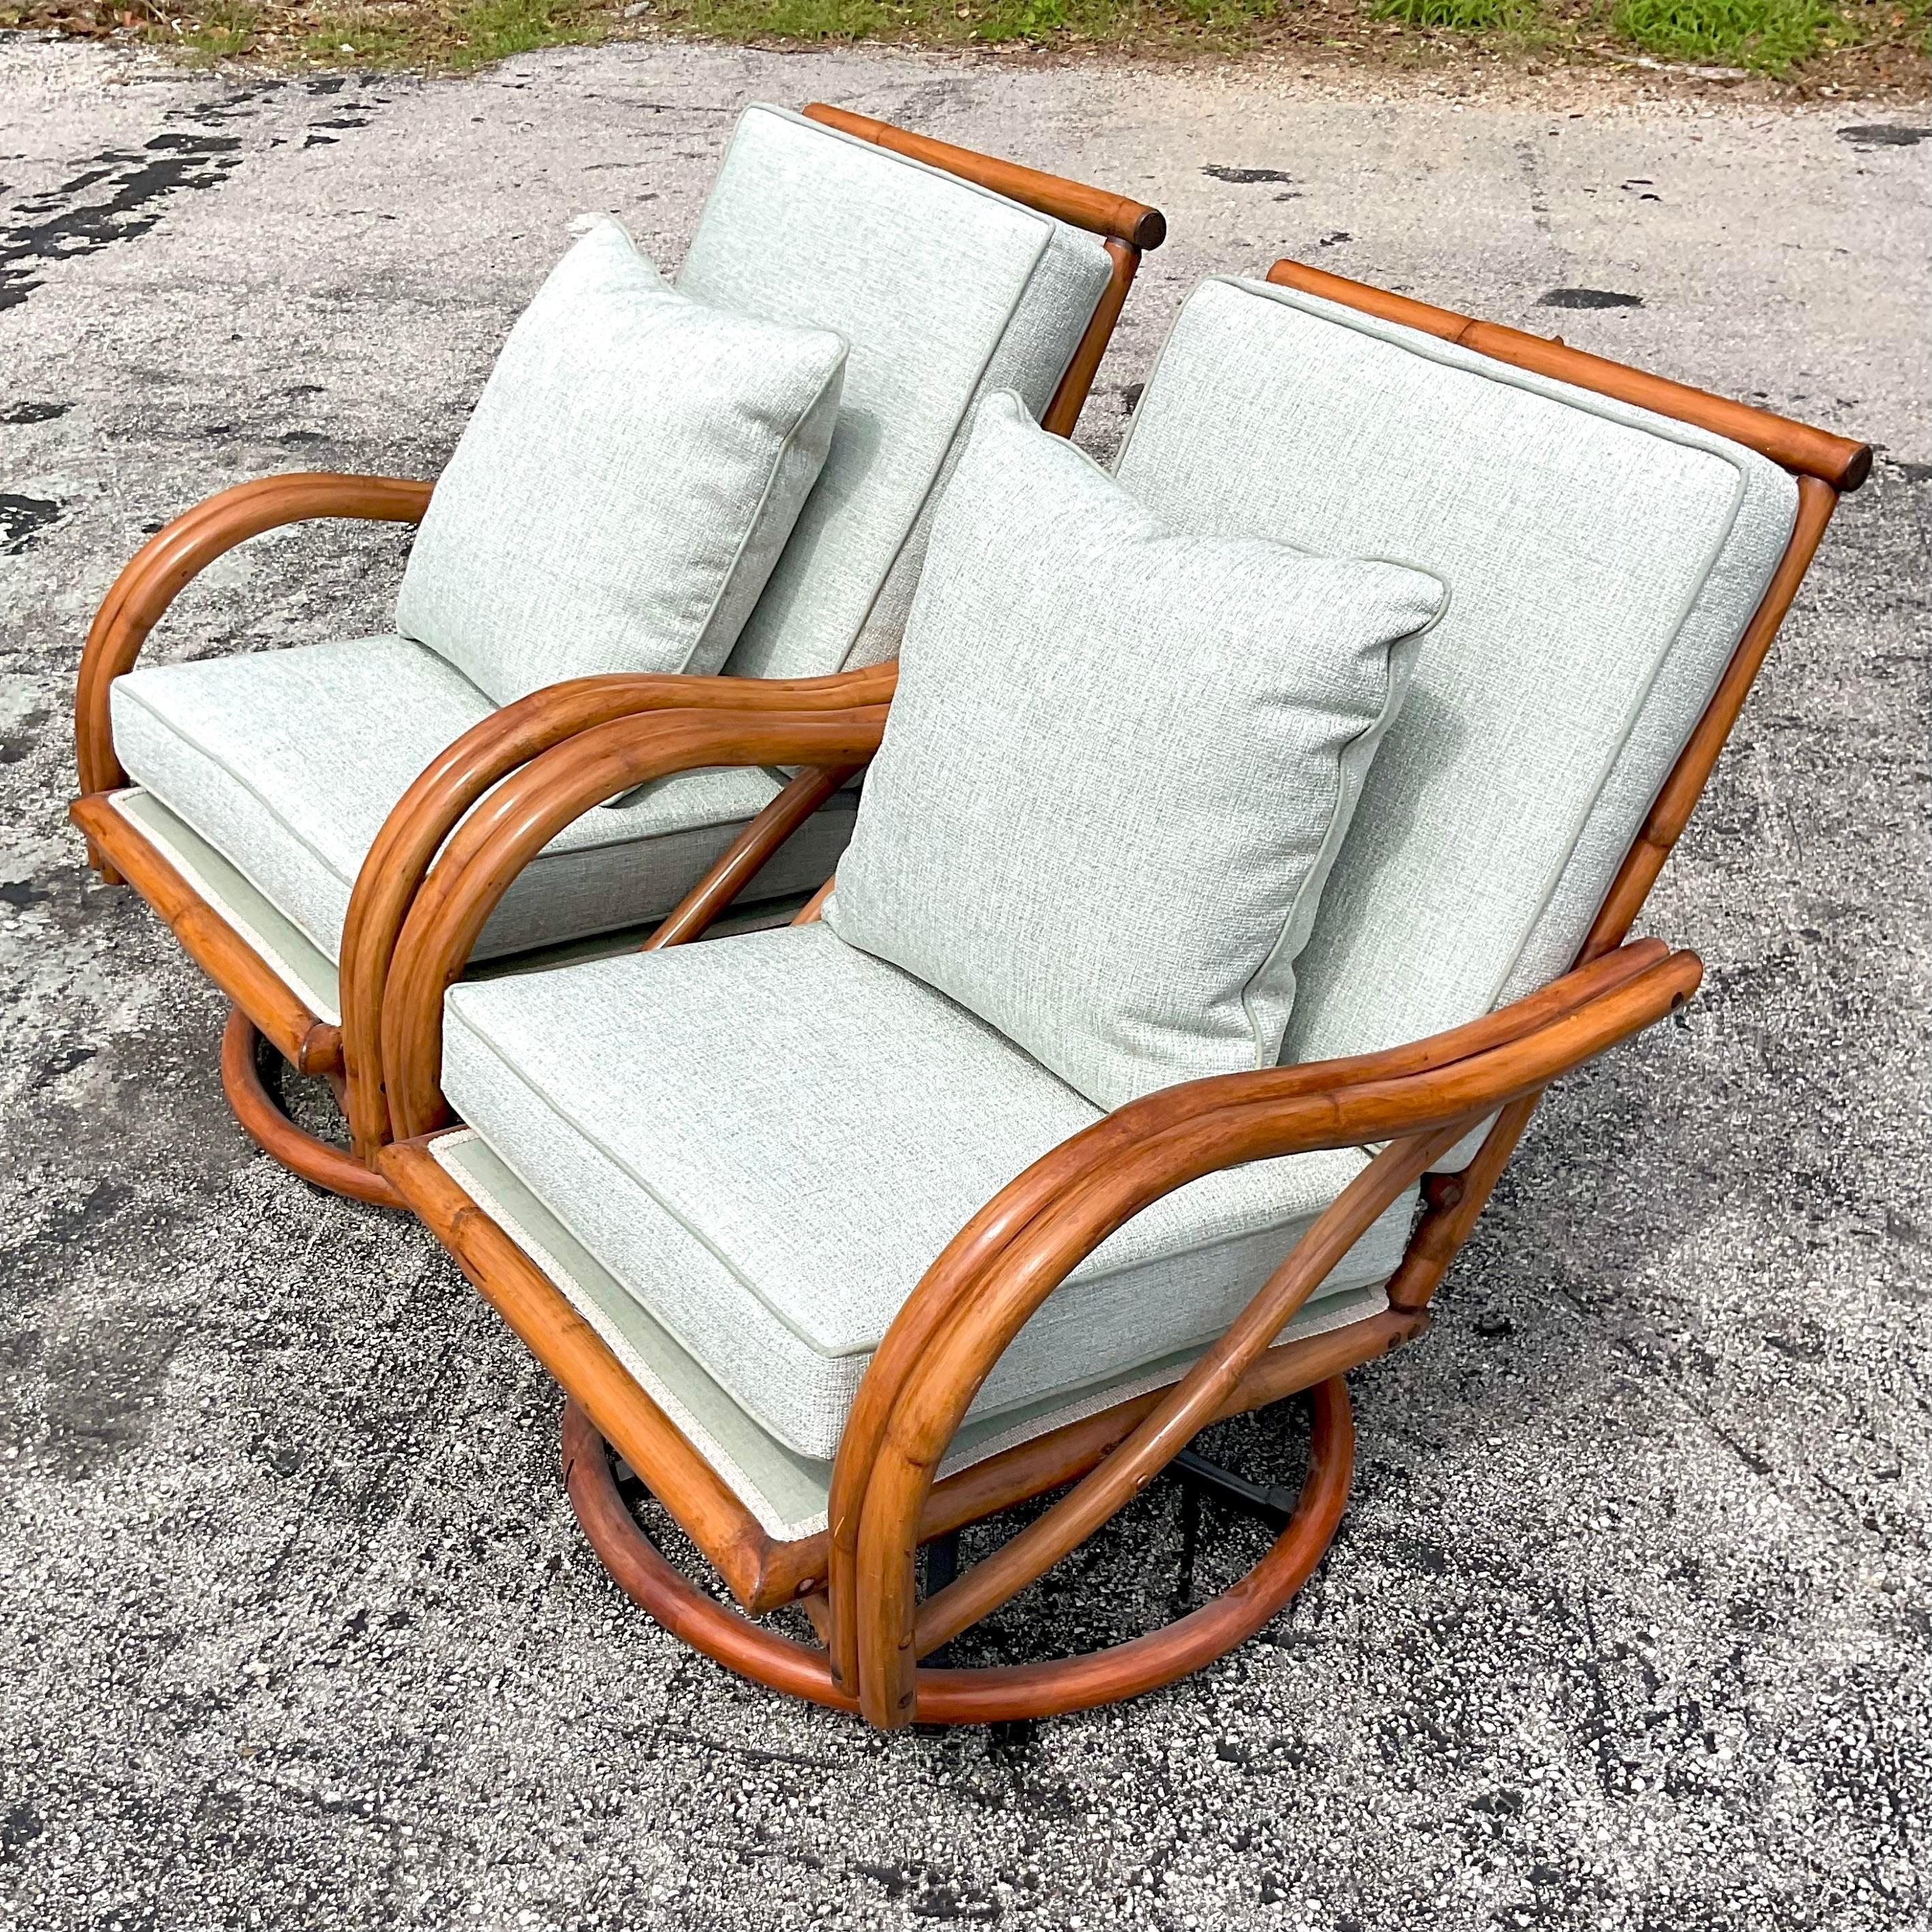 Mid-20th Century Vintage Coastal Bent Rattan Swivel Chairs - a Pair For Sale 1